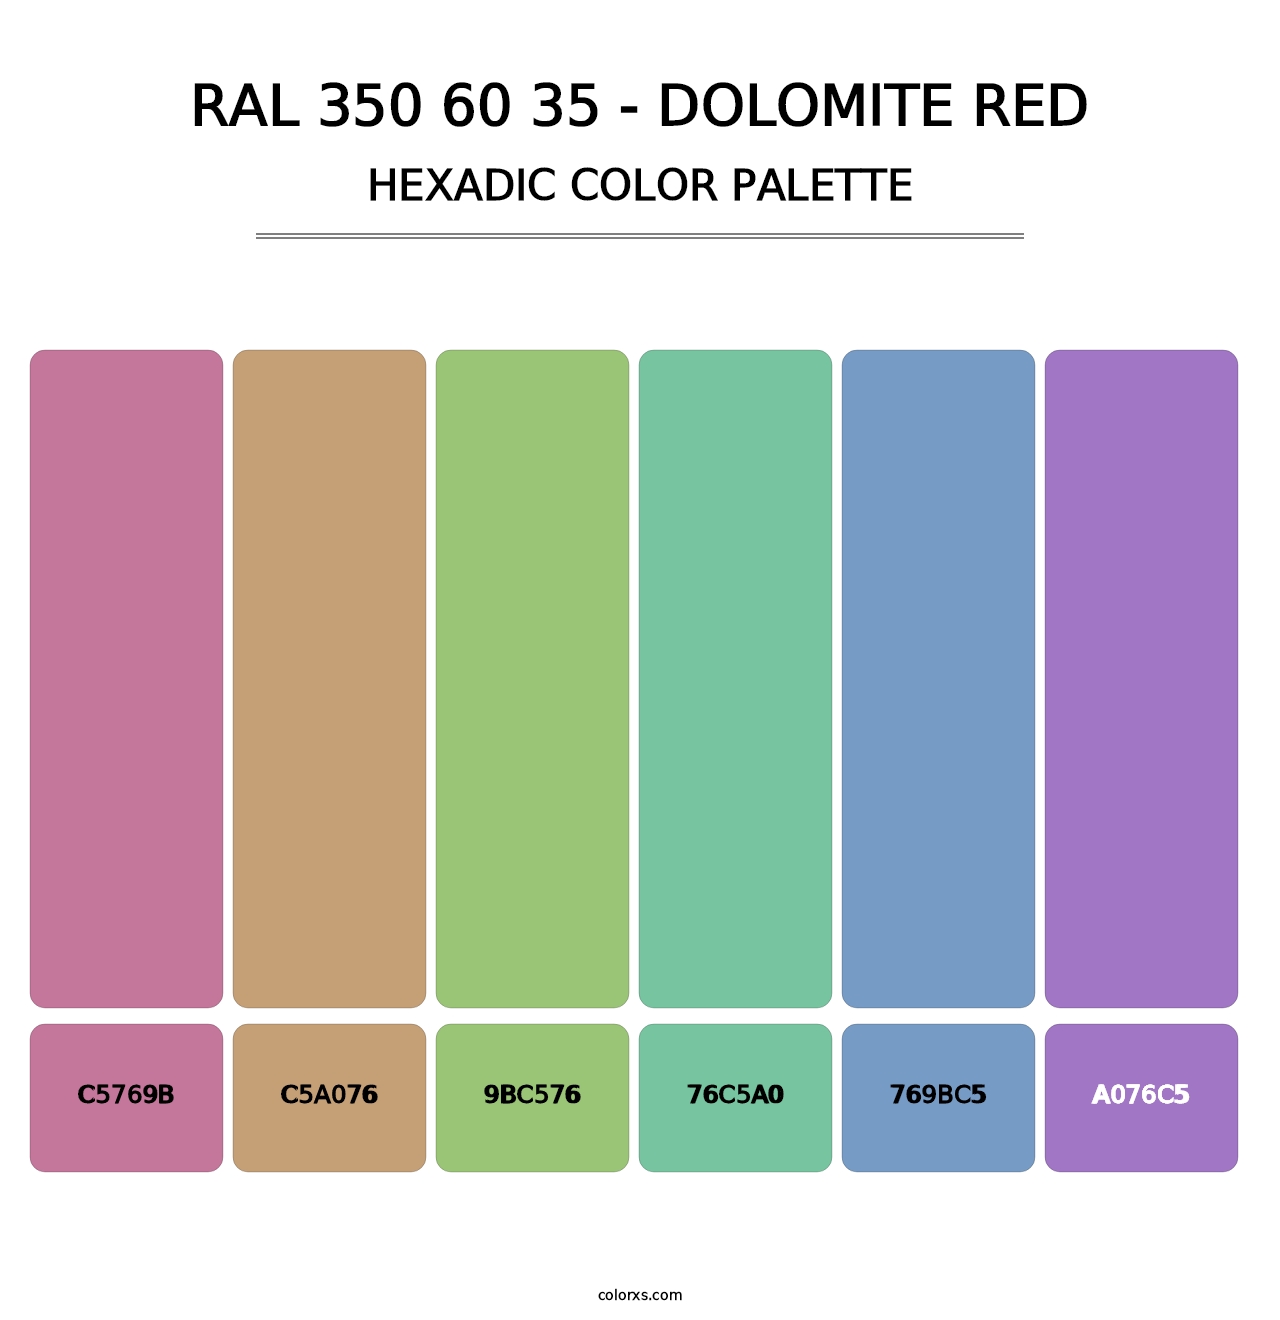 RAL 350 60 35 - Dolomite Red - Hexadic Color Palette